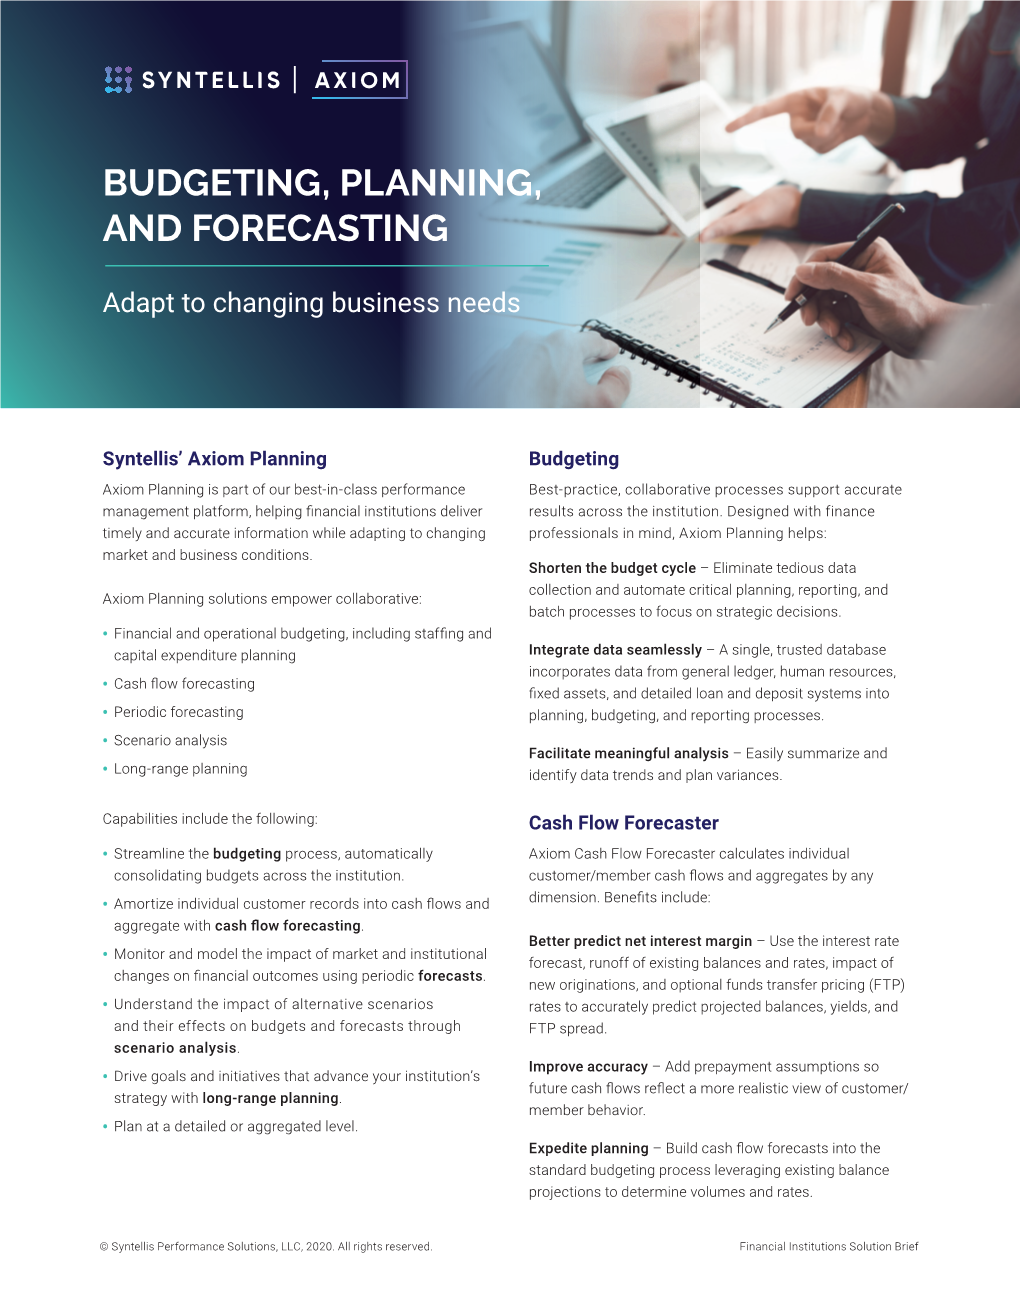 Budgeting, Planning, and Forecasting